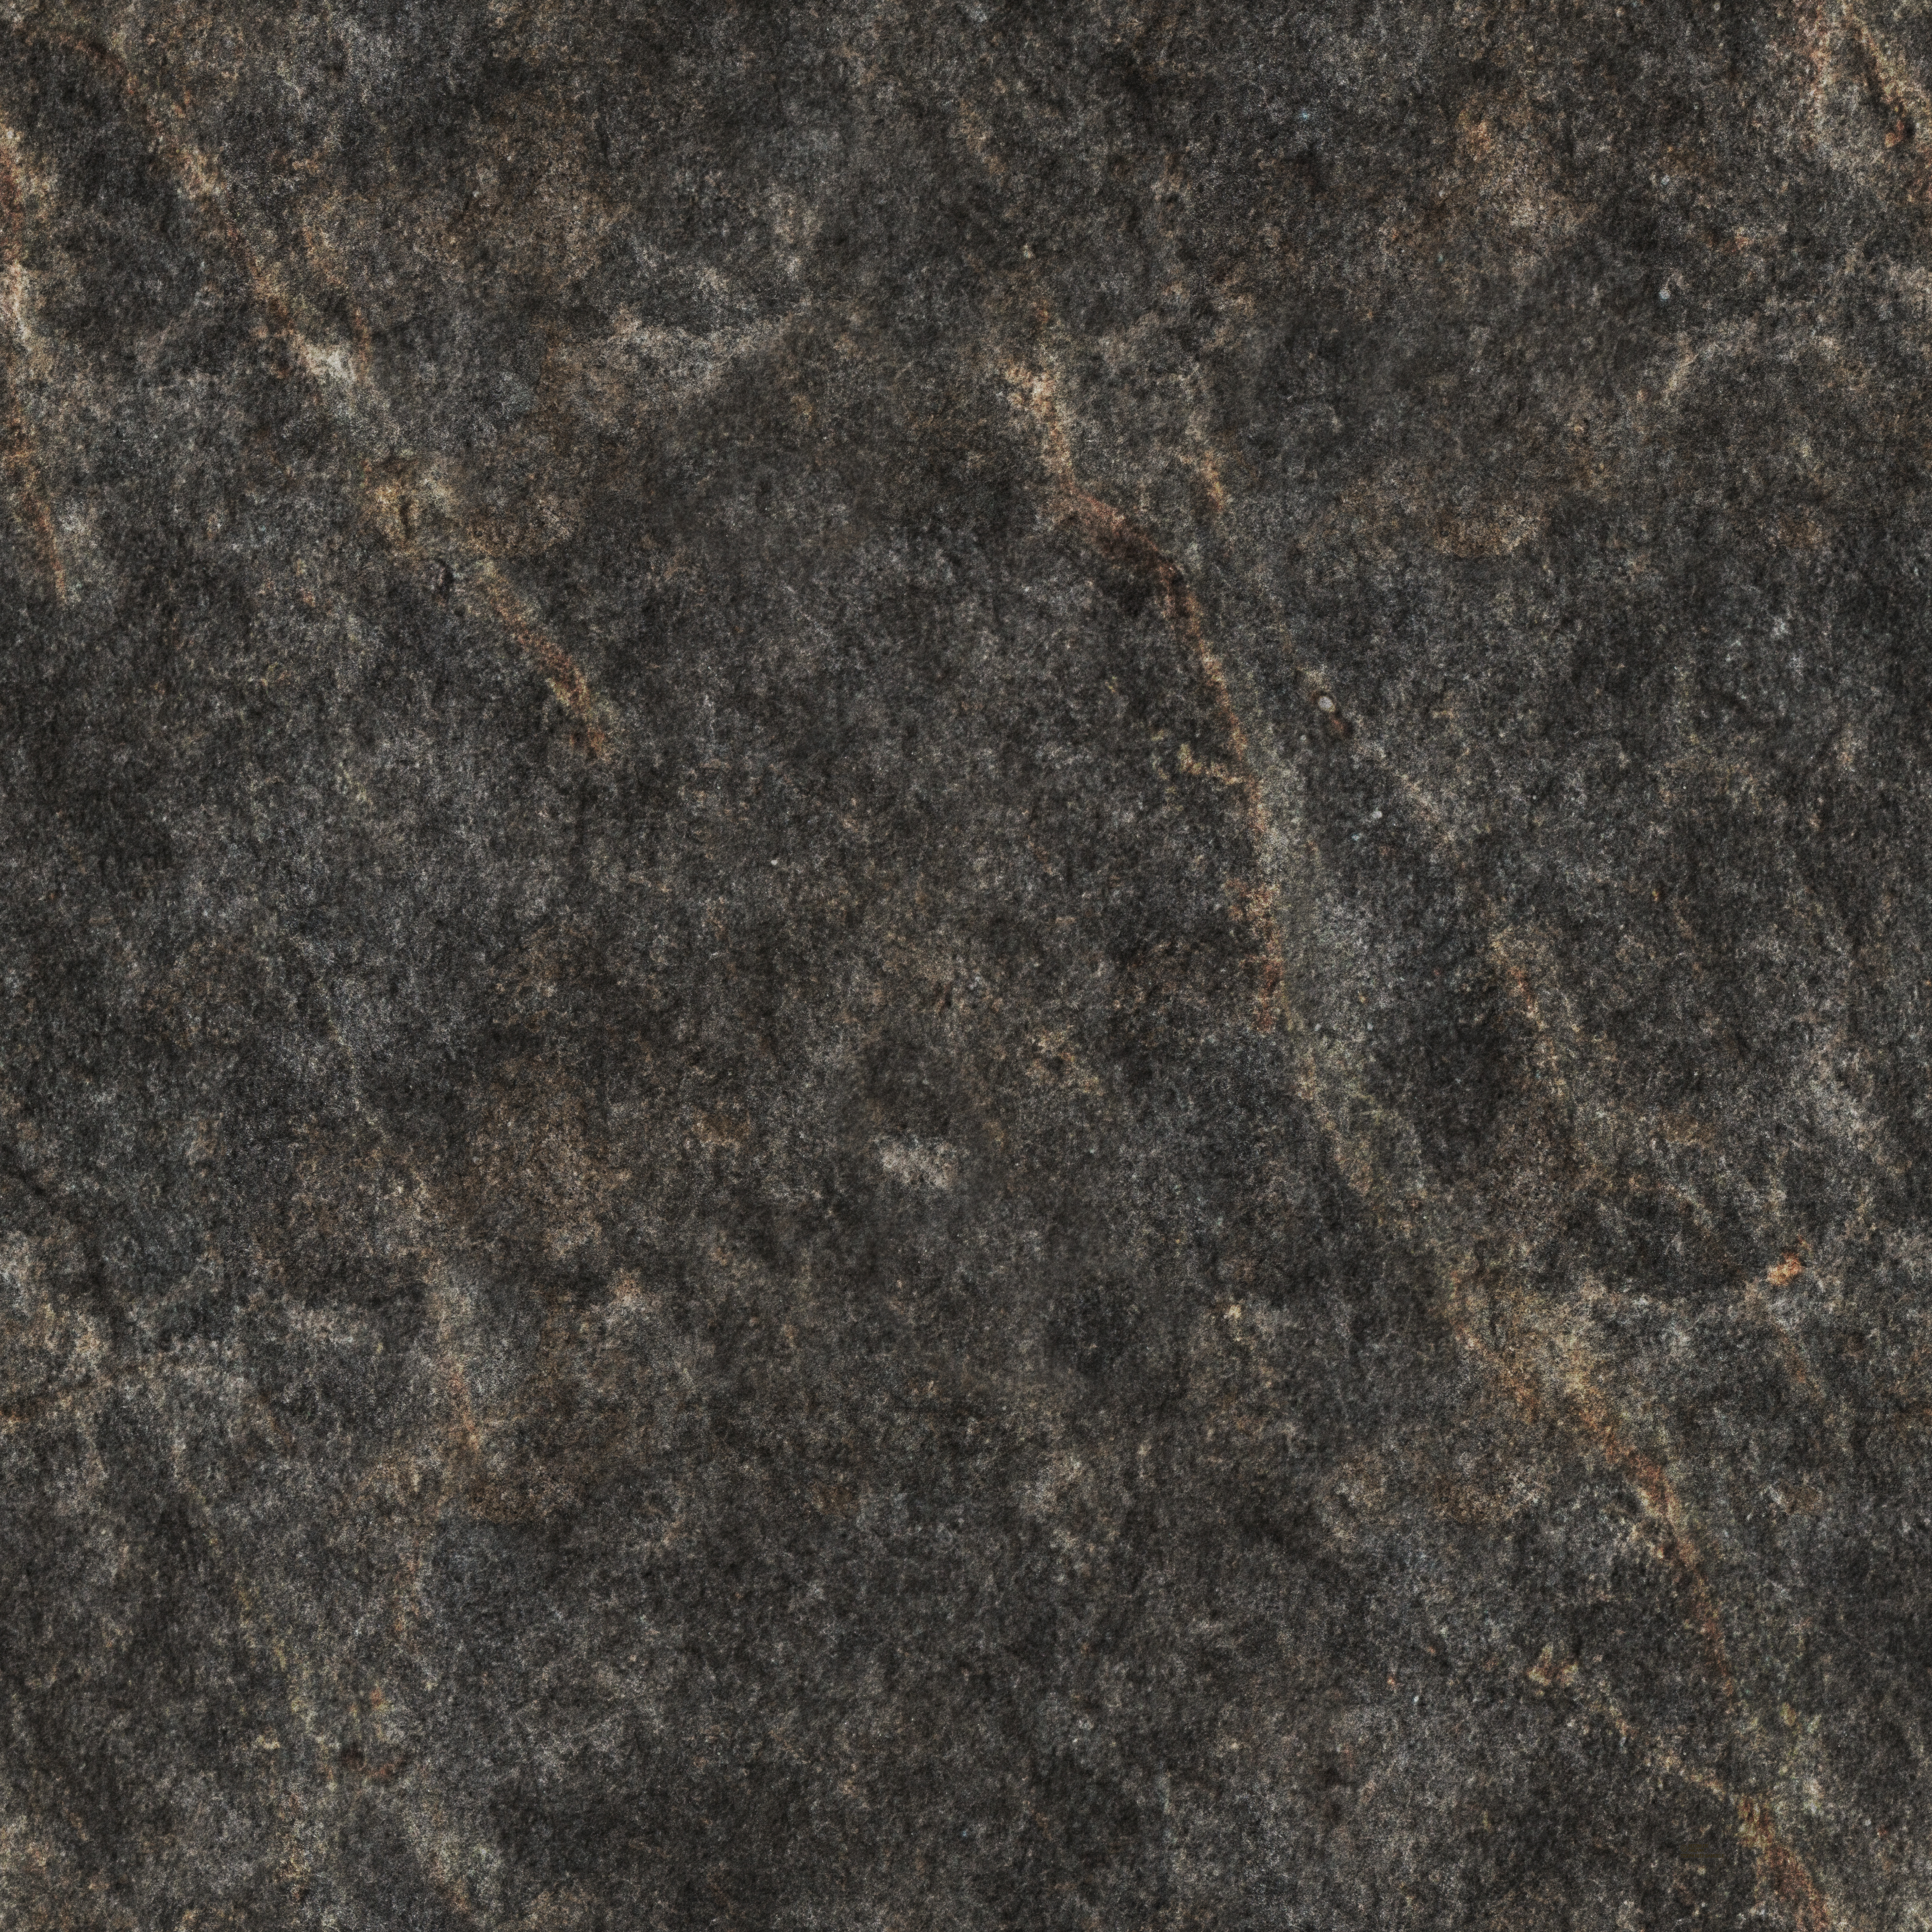 stone_texture__4k__by_reconditearcana d7r7q2g